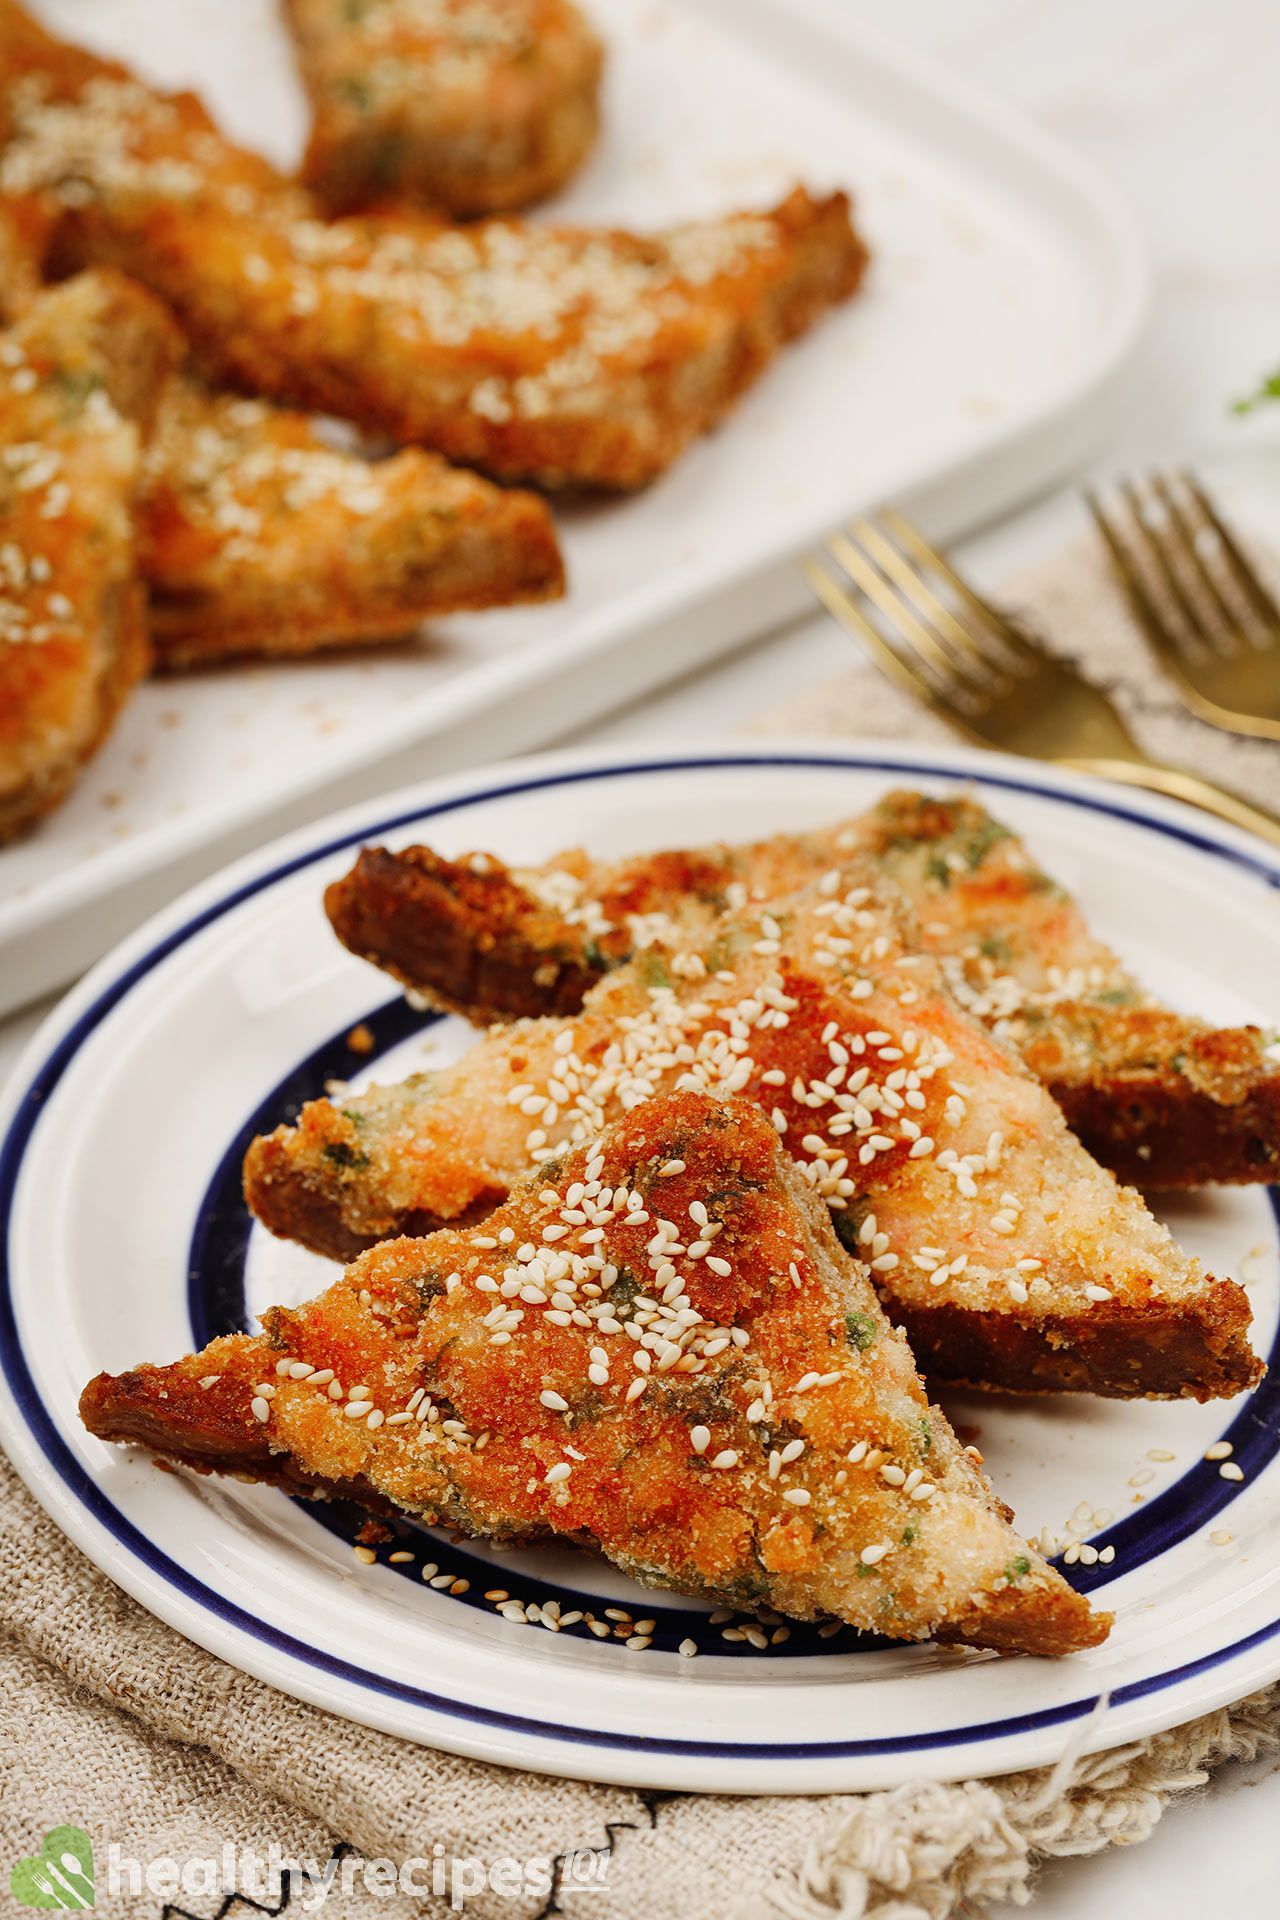 Is Our Shrimp Toast Recipe Healthy